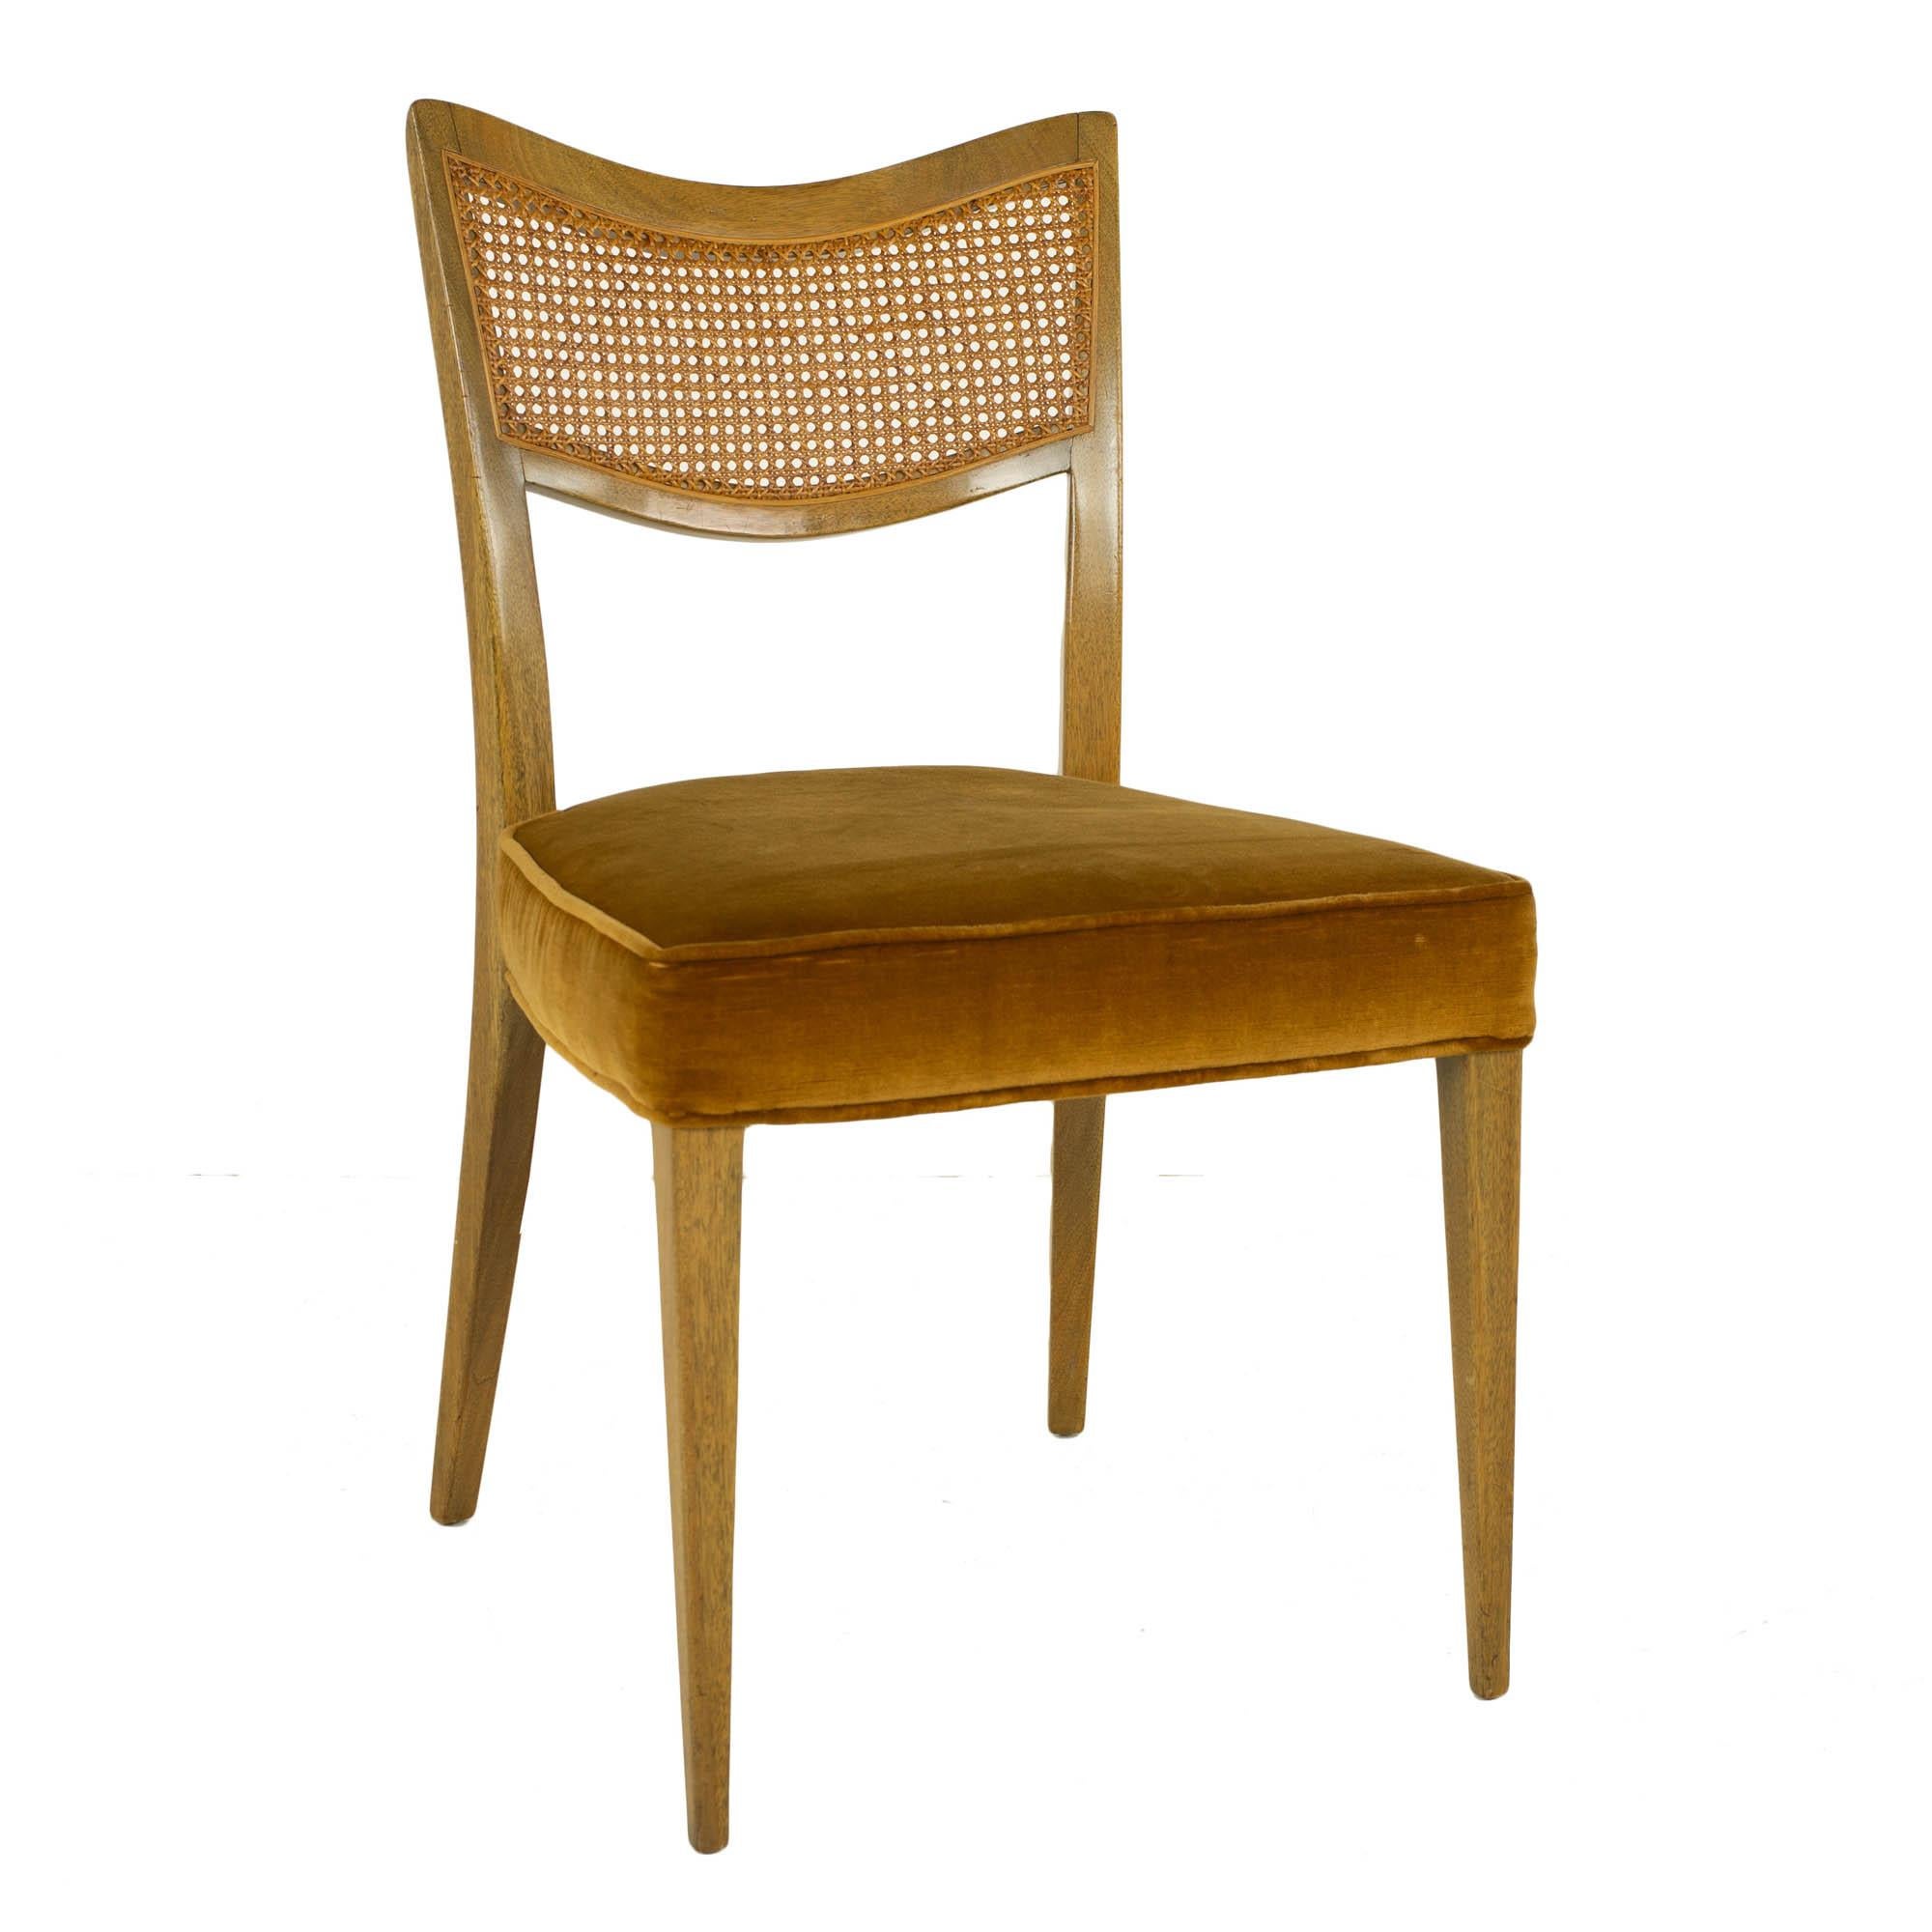 Draft Harvey Probber MCM Bleached Mahogany and Cane Dining Chairs, Set of 6 1